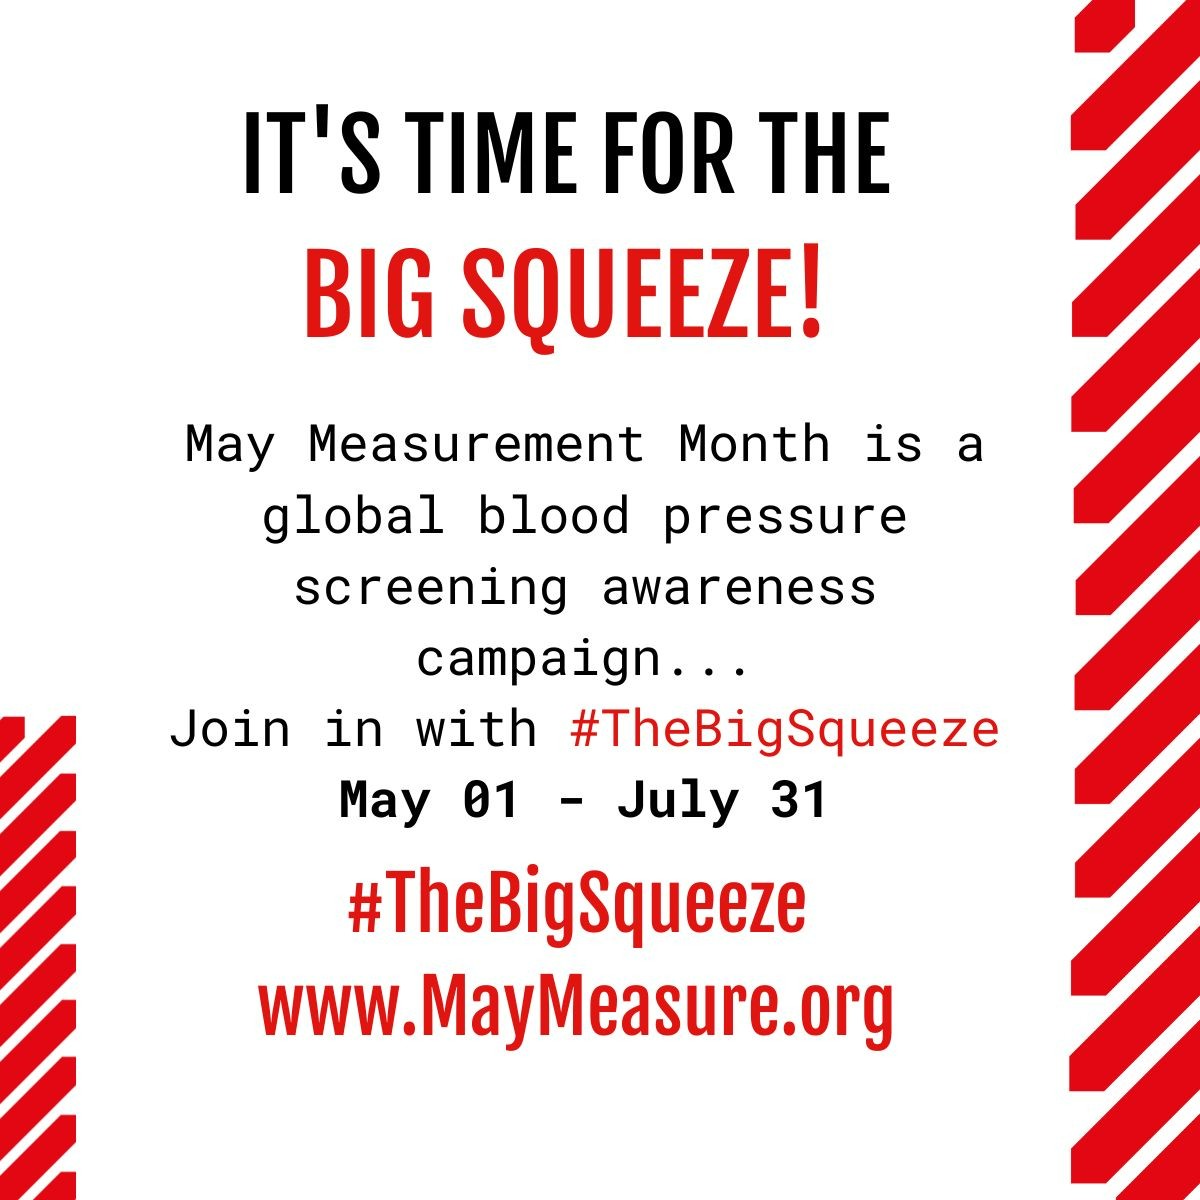 It's time for the big squeeze! May measurement month is a global blood pressure screening awareness campaign.